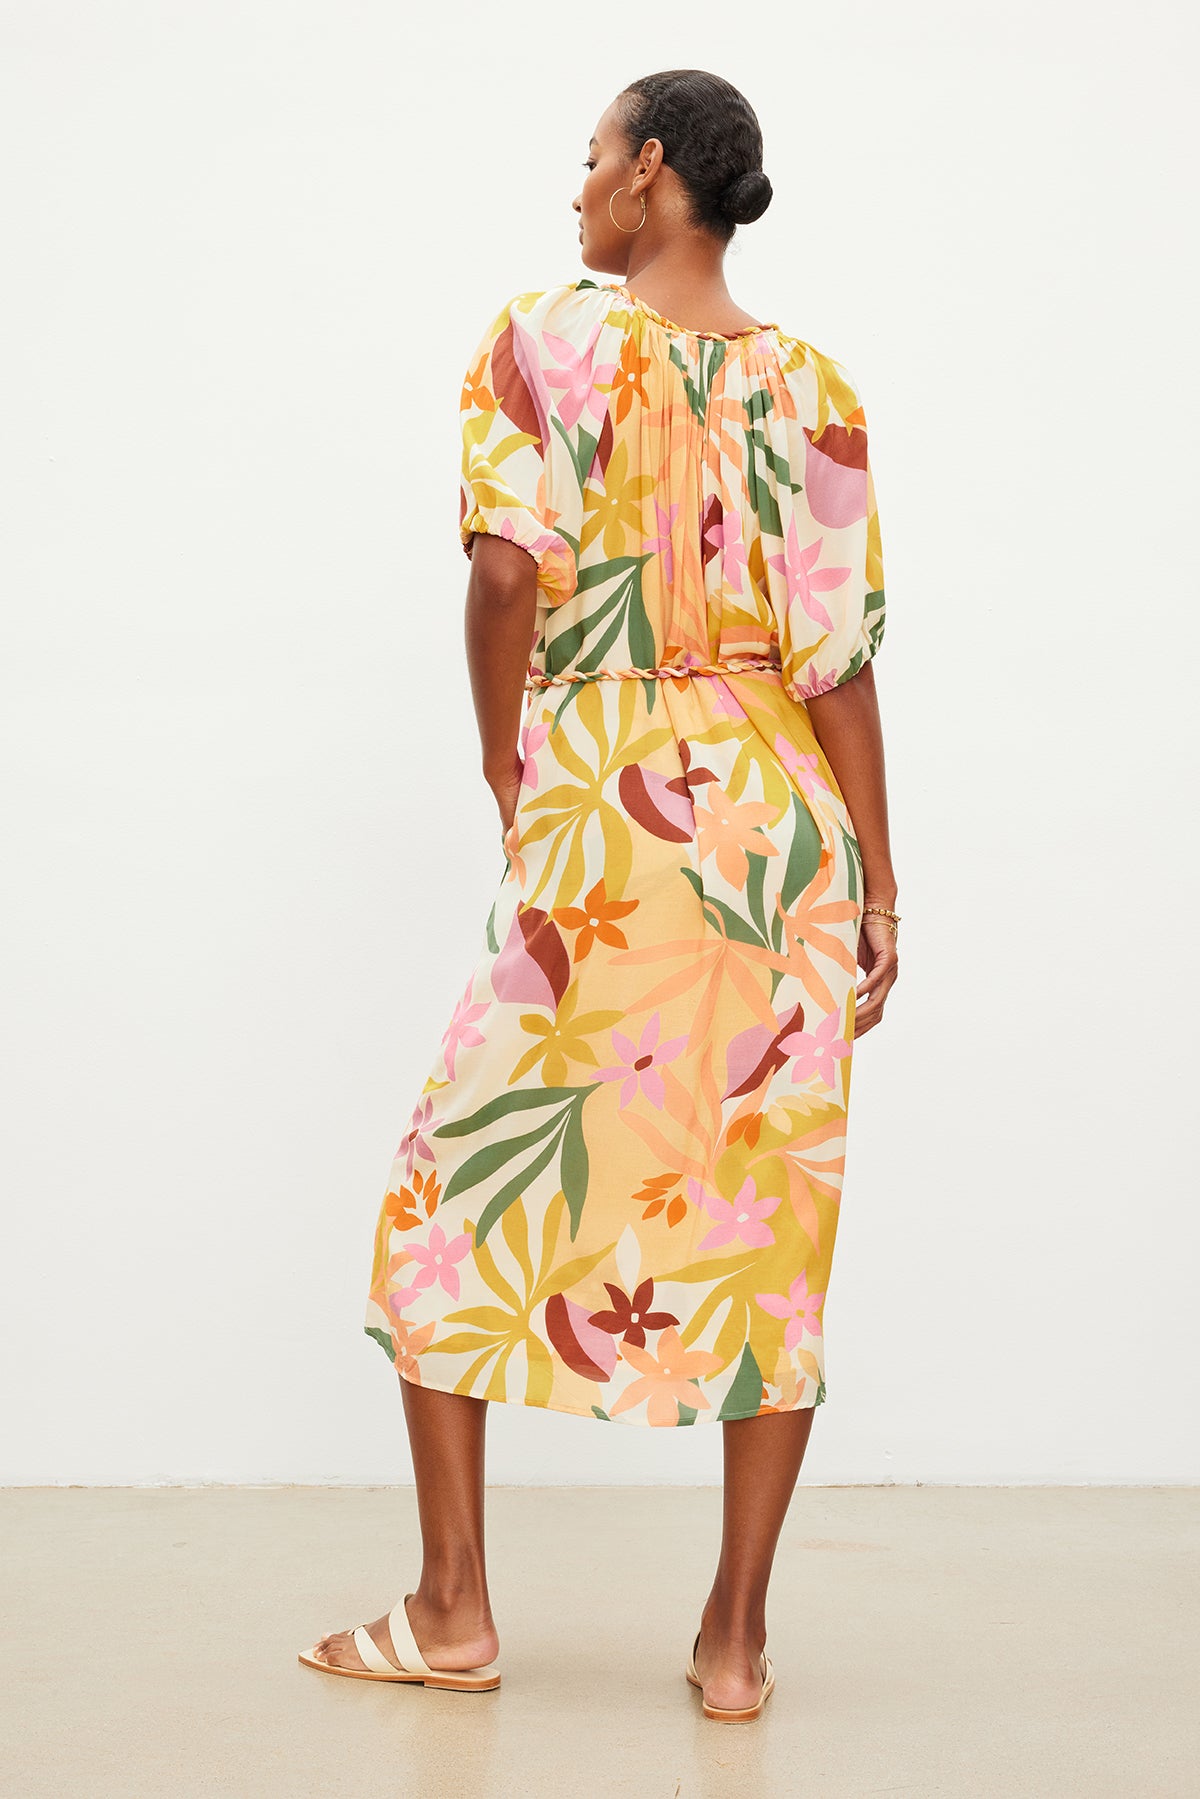 A woman stands with her back to the camera, wearing a Velvet by Graham & Spencer CAROL PRINTED BOHO DRESS with a detachable twist braid belt and tan sandals against a plain background.-35955494355137